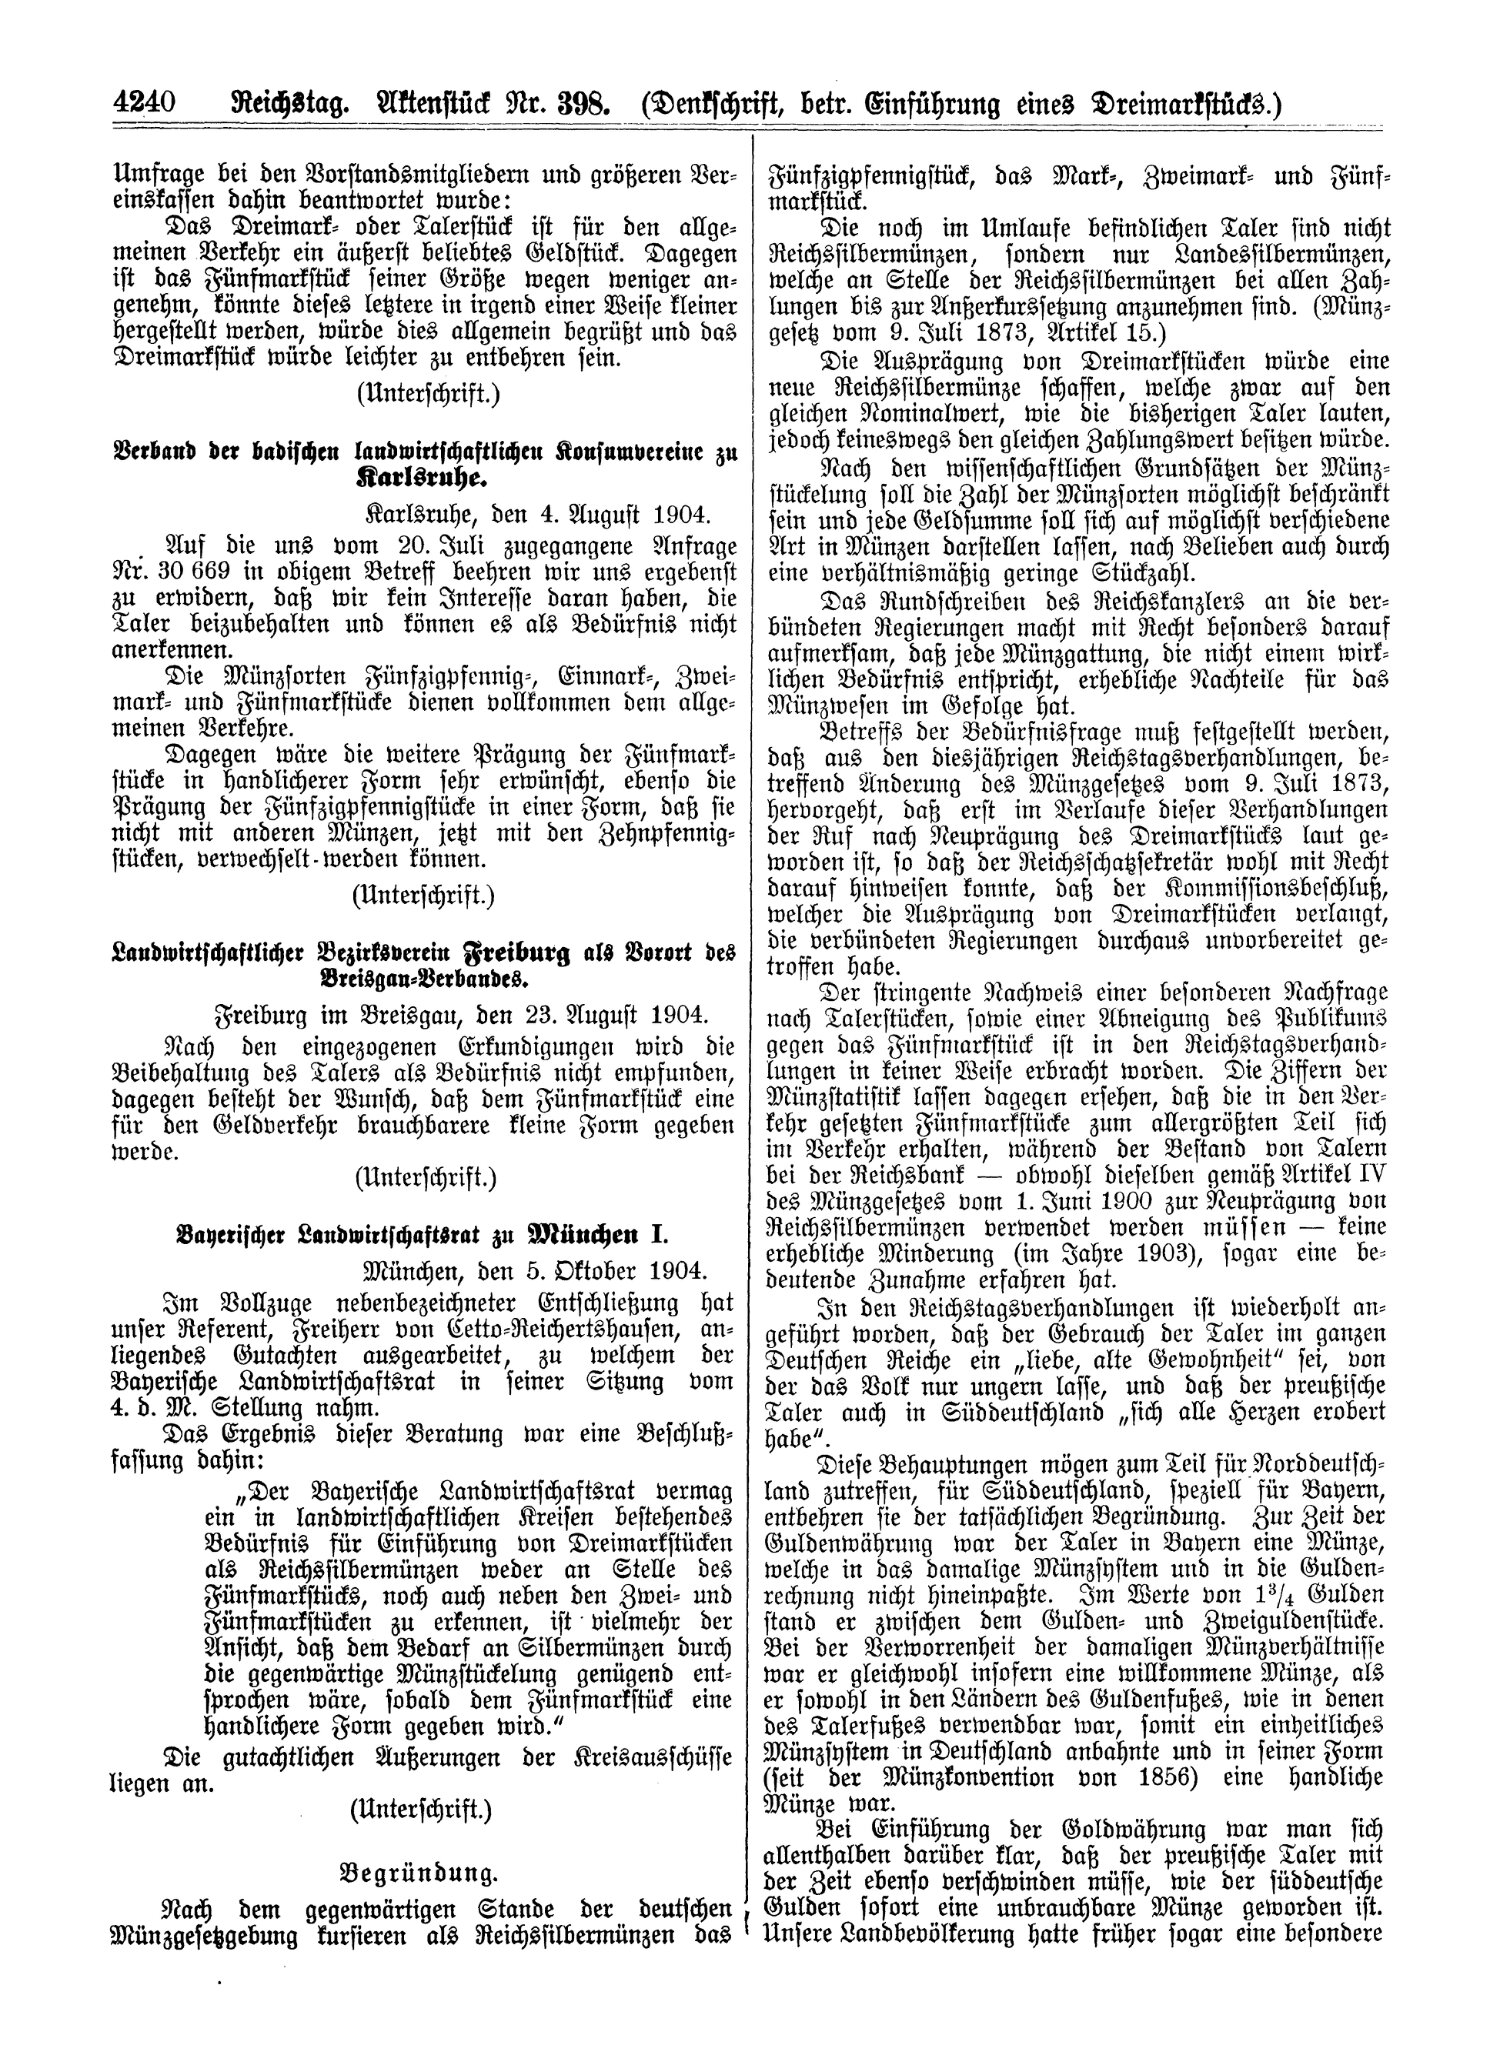 Scan of page 4240